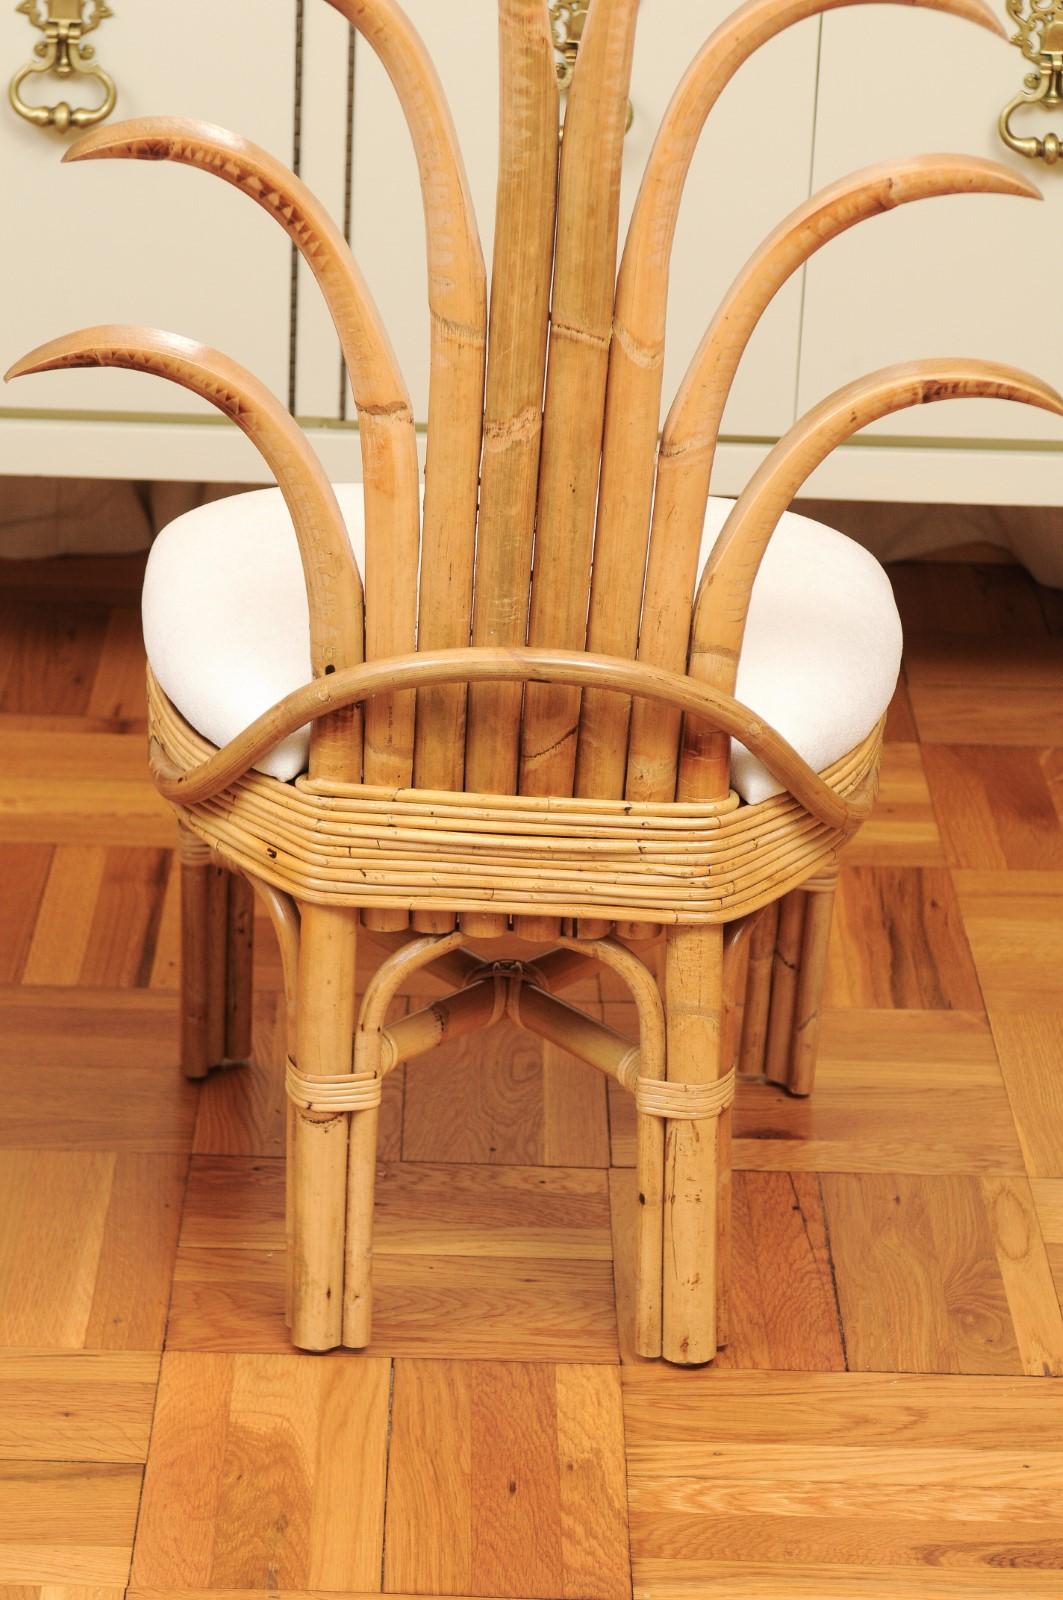 This magnificent set of dining chairs is shipped as professionally photographed and described in the listing: meticulously restored and completely installation ready. This incredible set is unique on the World market.

An absolutely majestic set of